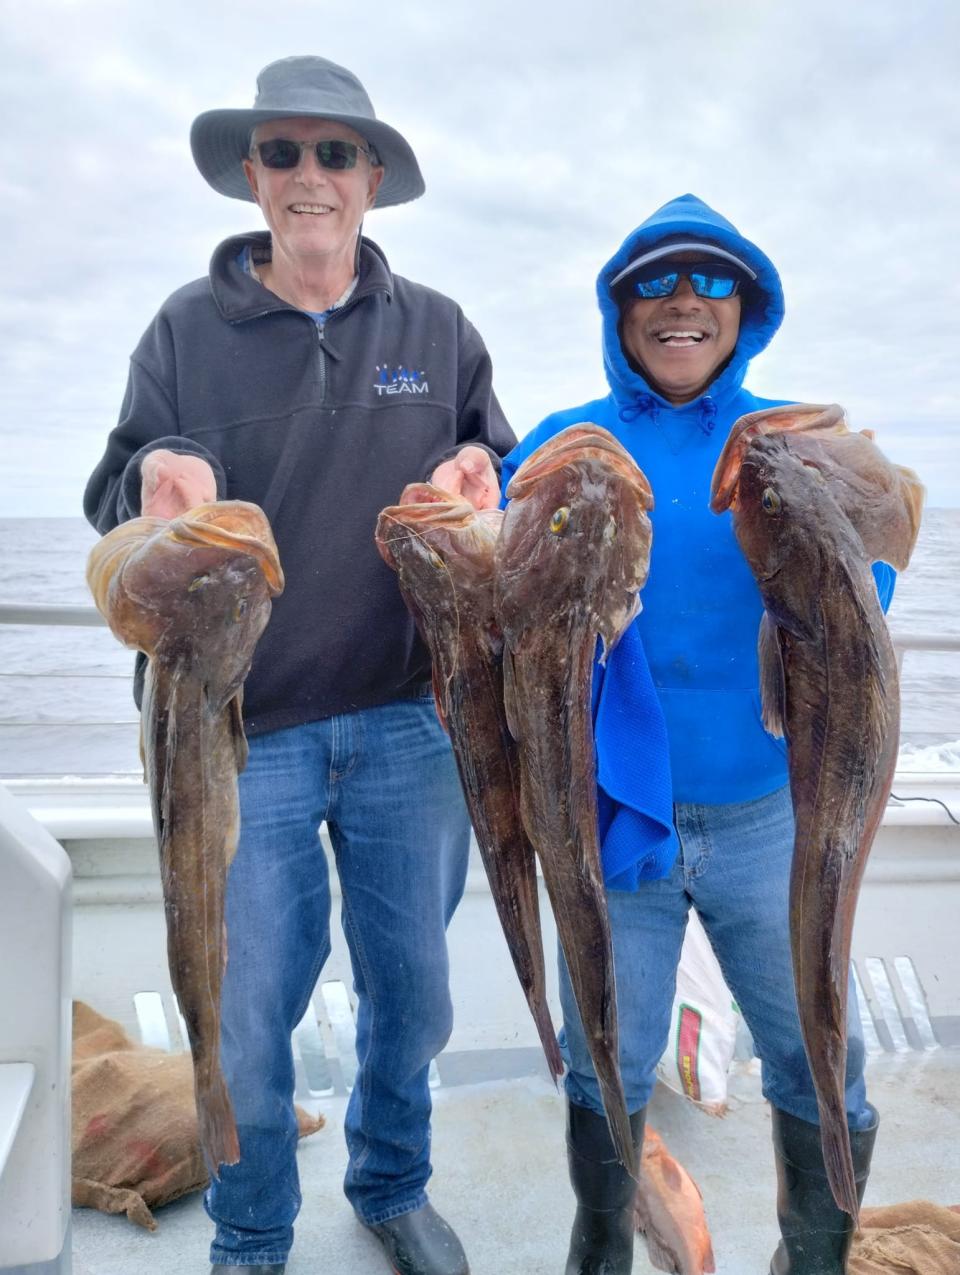 These two anglers caught their two-fish limits of lingcod while fishing aboard the Check Mate sportfishing boat in Monterey.